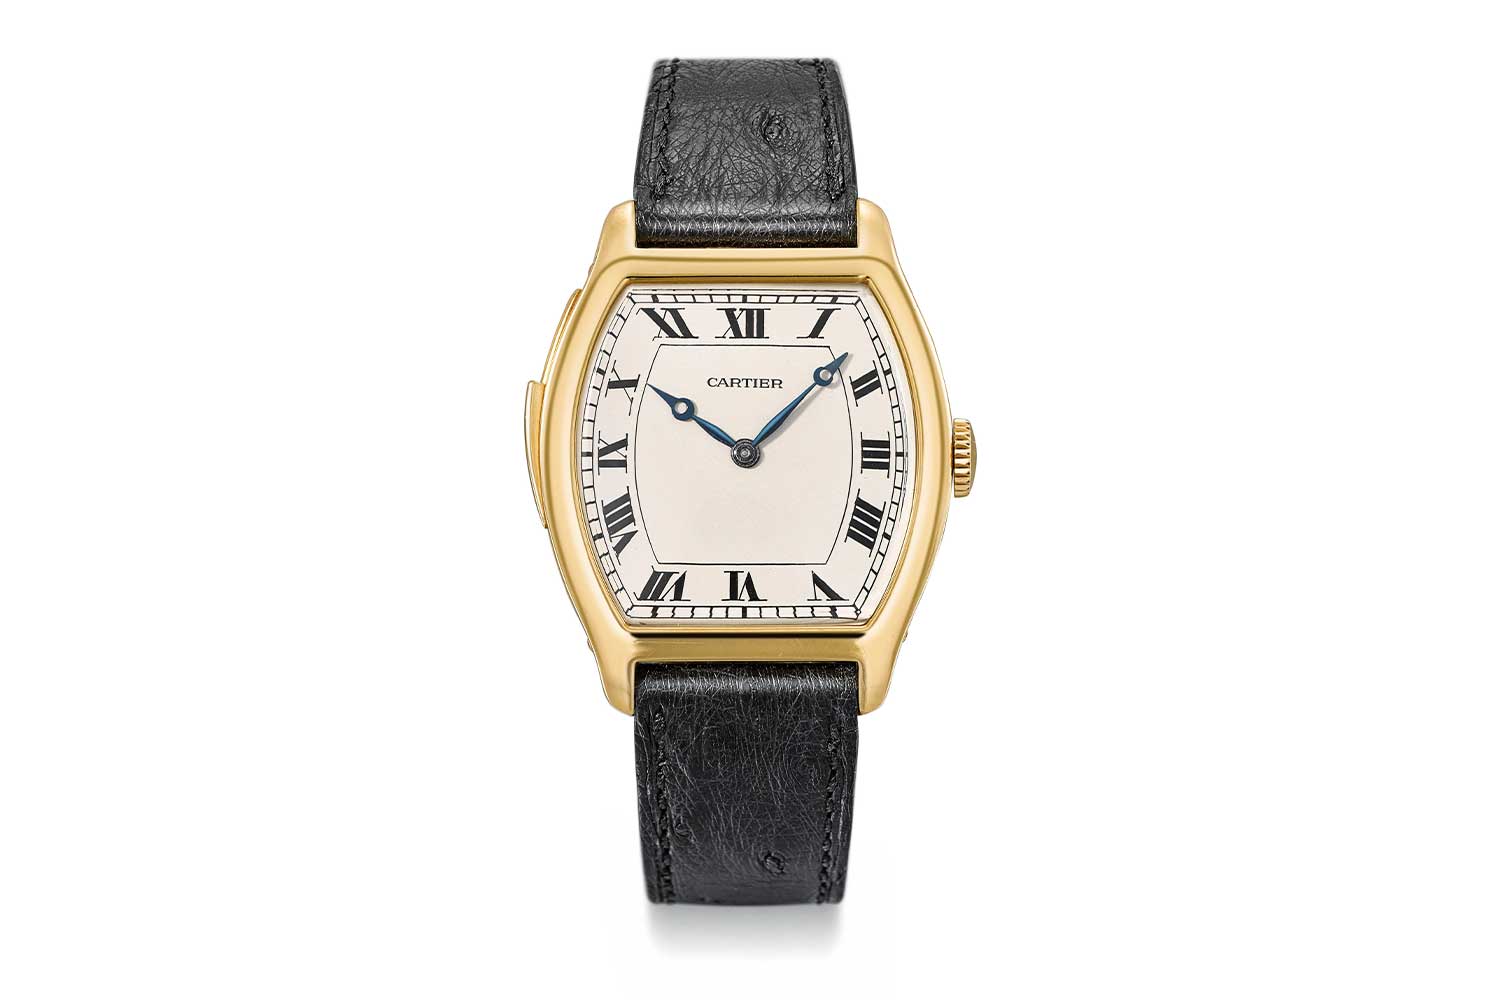 The same Cartier 18K gold tonneau-shaped minute repeating wristwatch, circa 1929, that was auctioned off with Antiquorum in 2002, resurfaced with Christie's in May of 2018 and sold for CHF 312,500; we're able to determine that the two instances of the sale refer to the same watch as the watch and movement numbers can be matched, digit for NO. 22’302, MOVEMENT NO. 40'736 (Image: Christies.com)